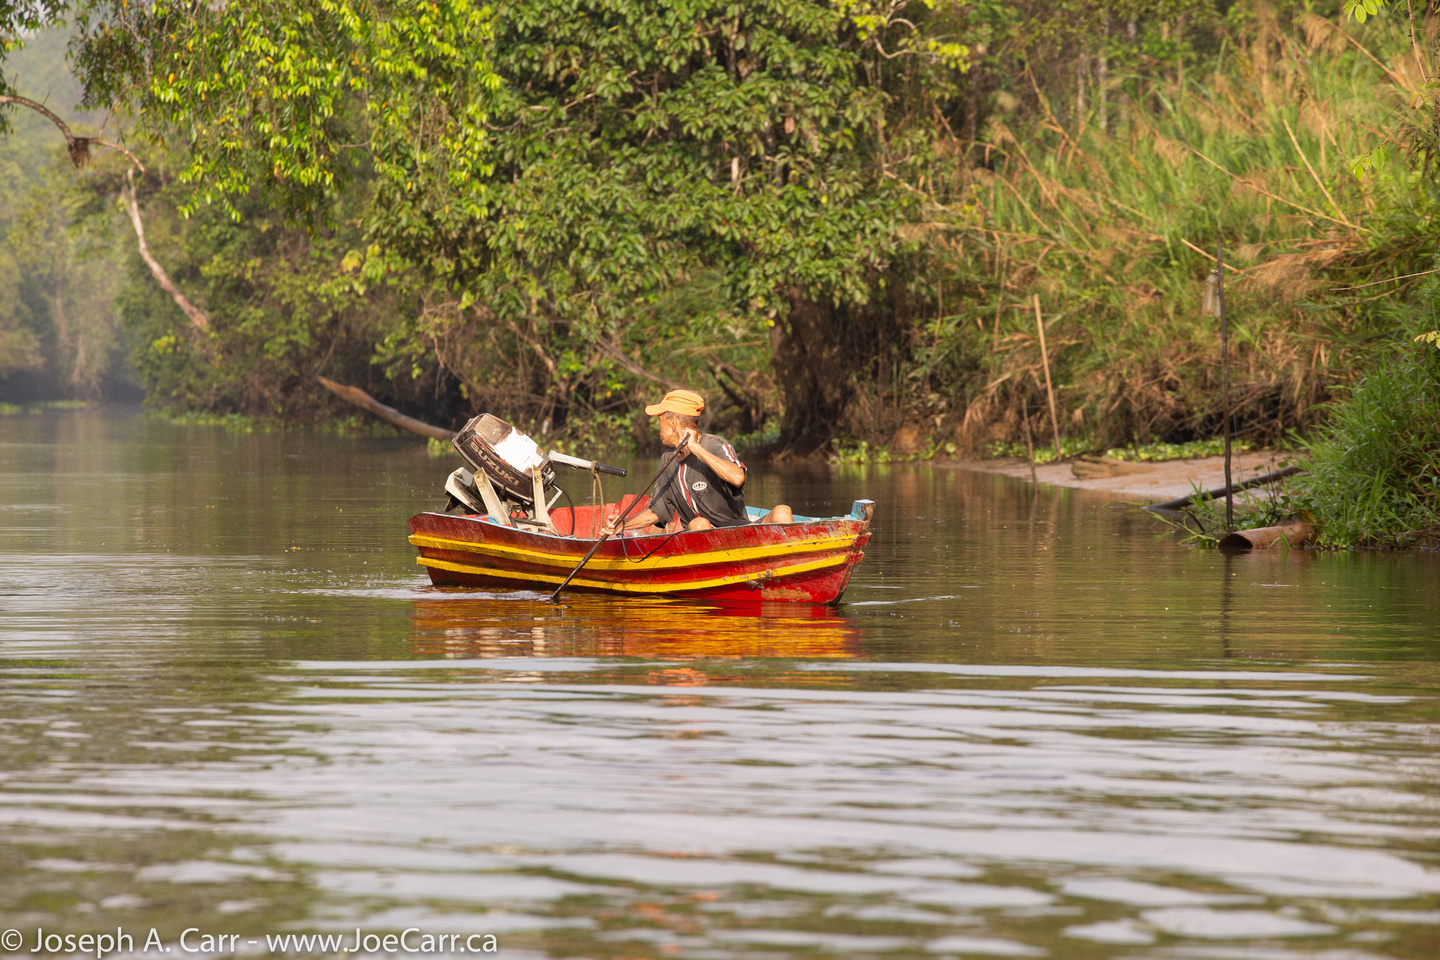 A local fisher on a tributary of the Kinabatangan  River.